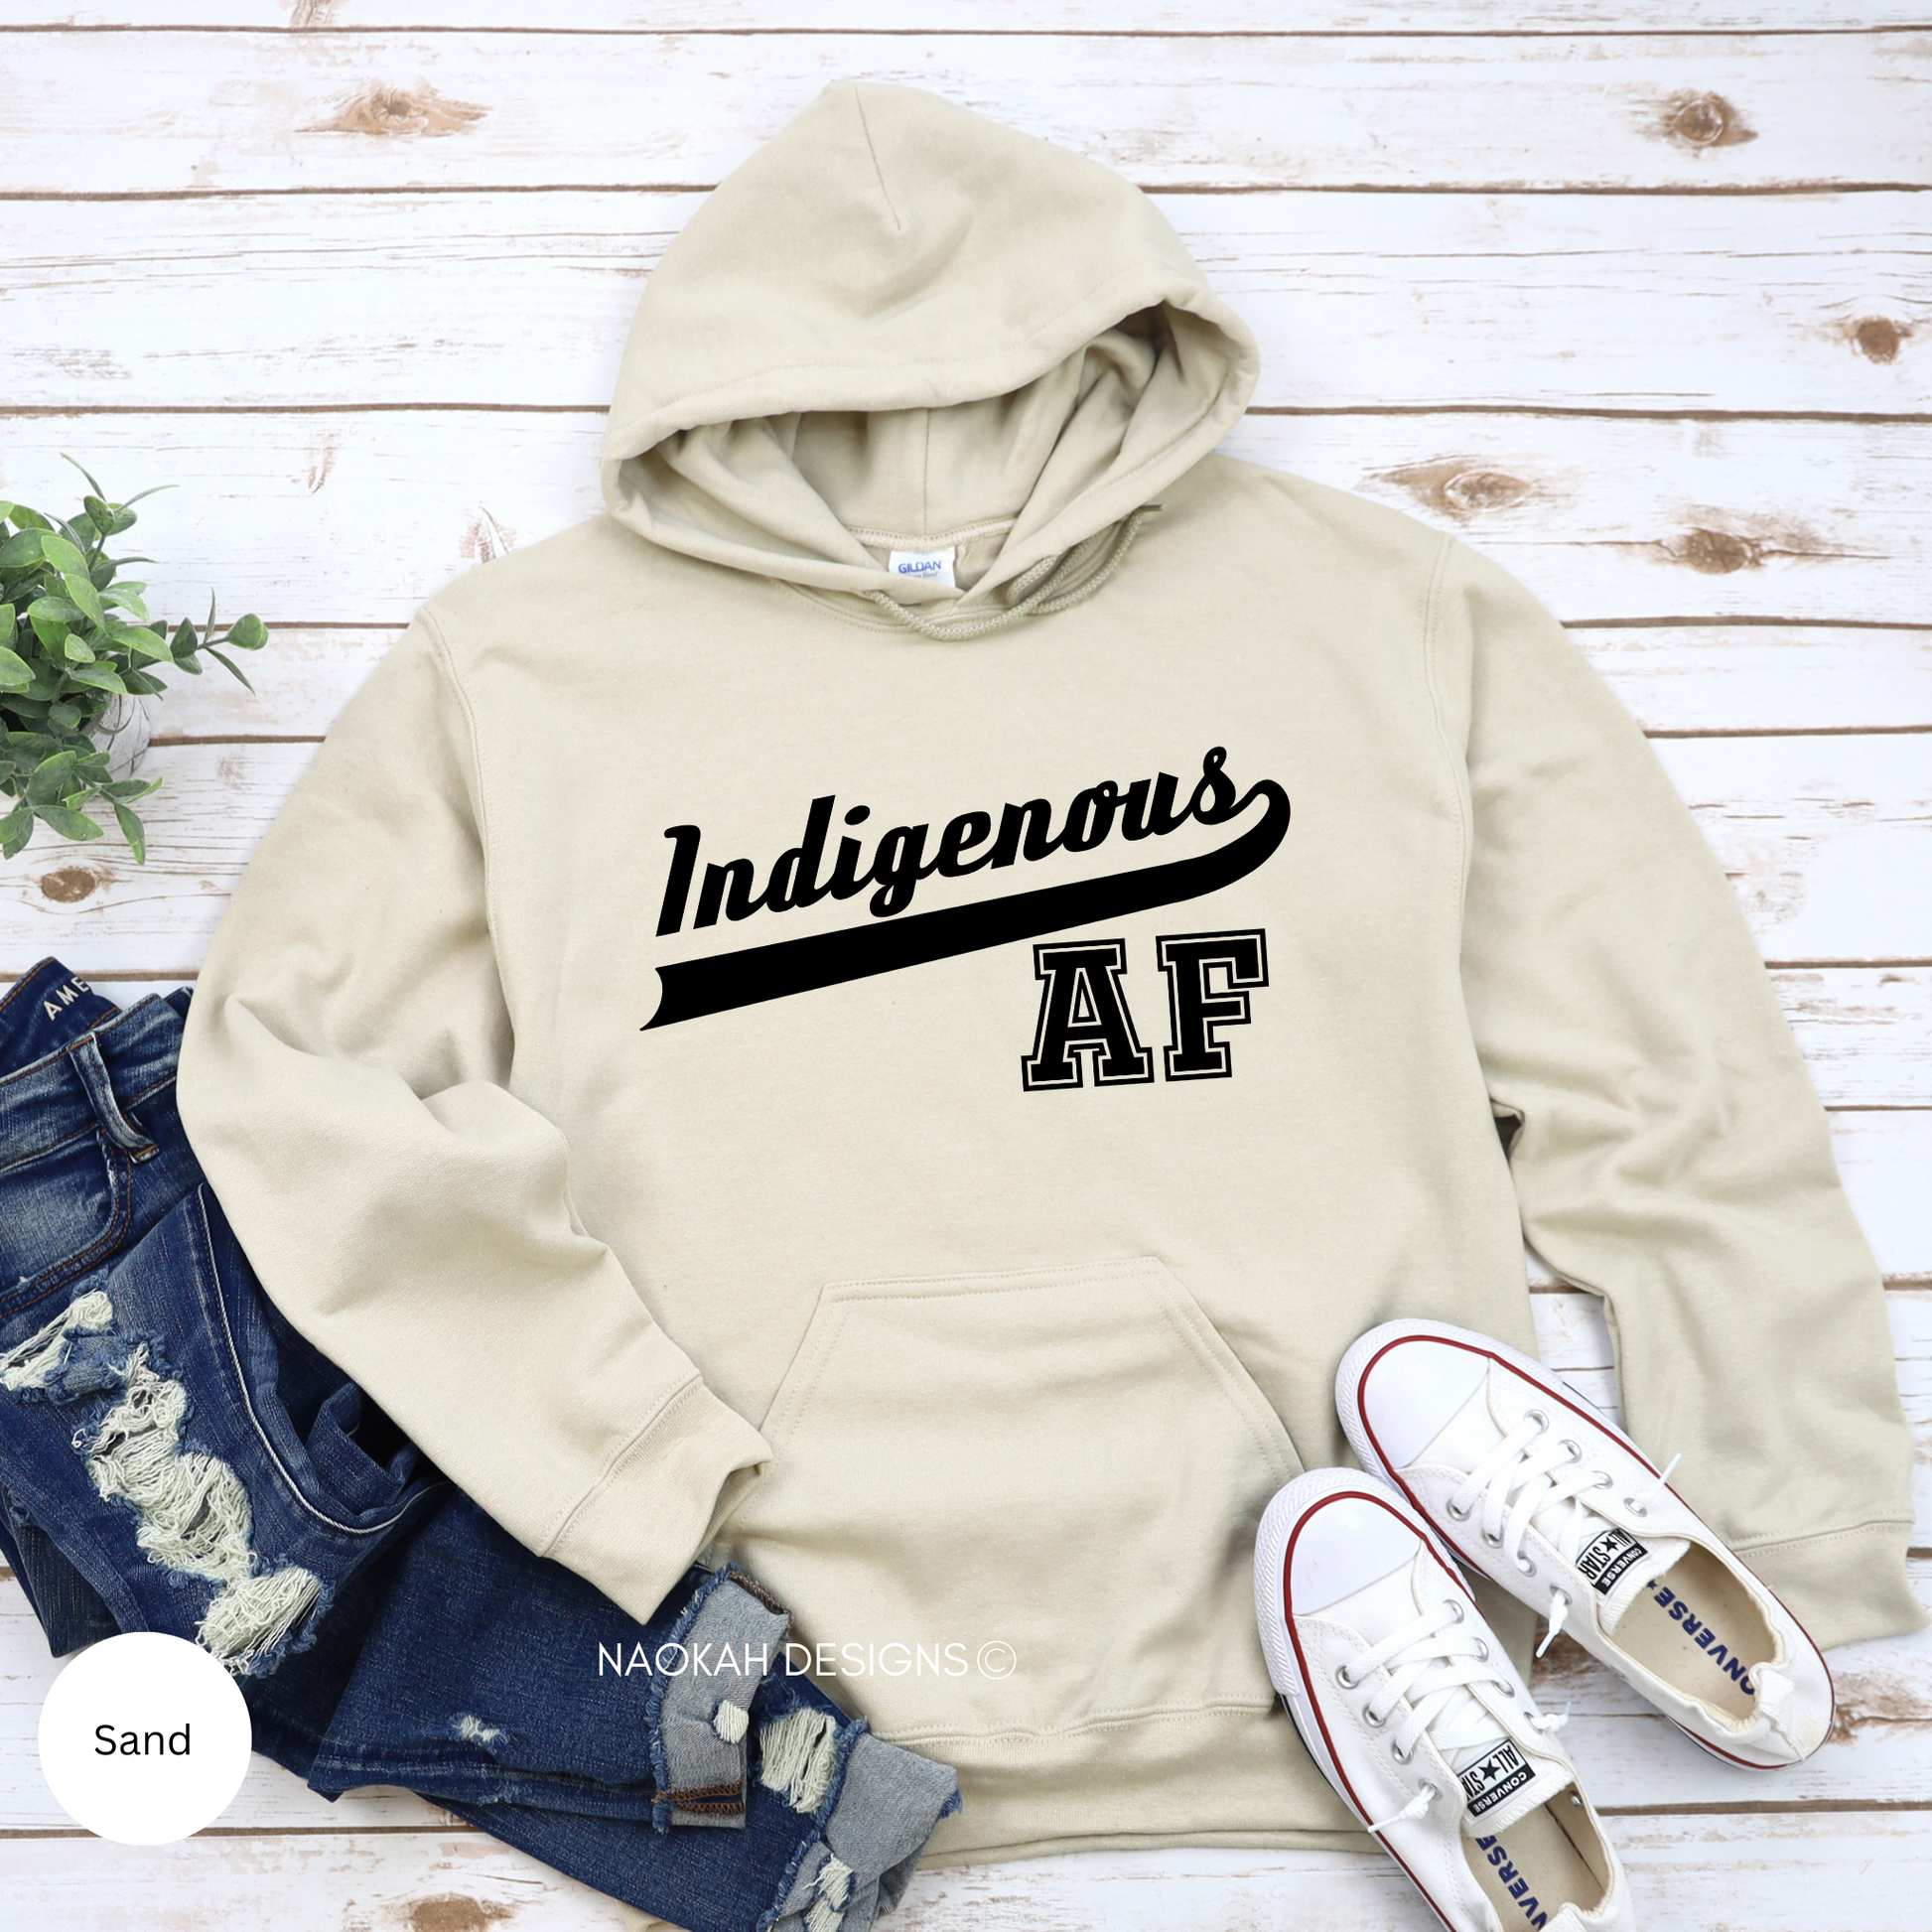 Indigenous AF Sweater, Indigenous Sweater, Native Sweater, Proud Indigenous Sweater, Native Pride, Indigenous Resilience Sweater, Native AF